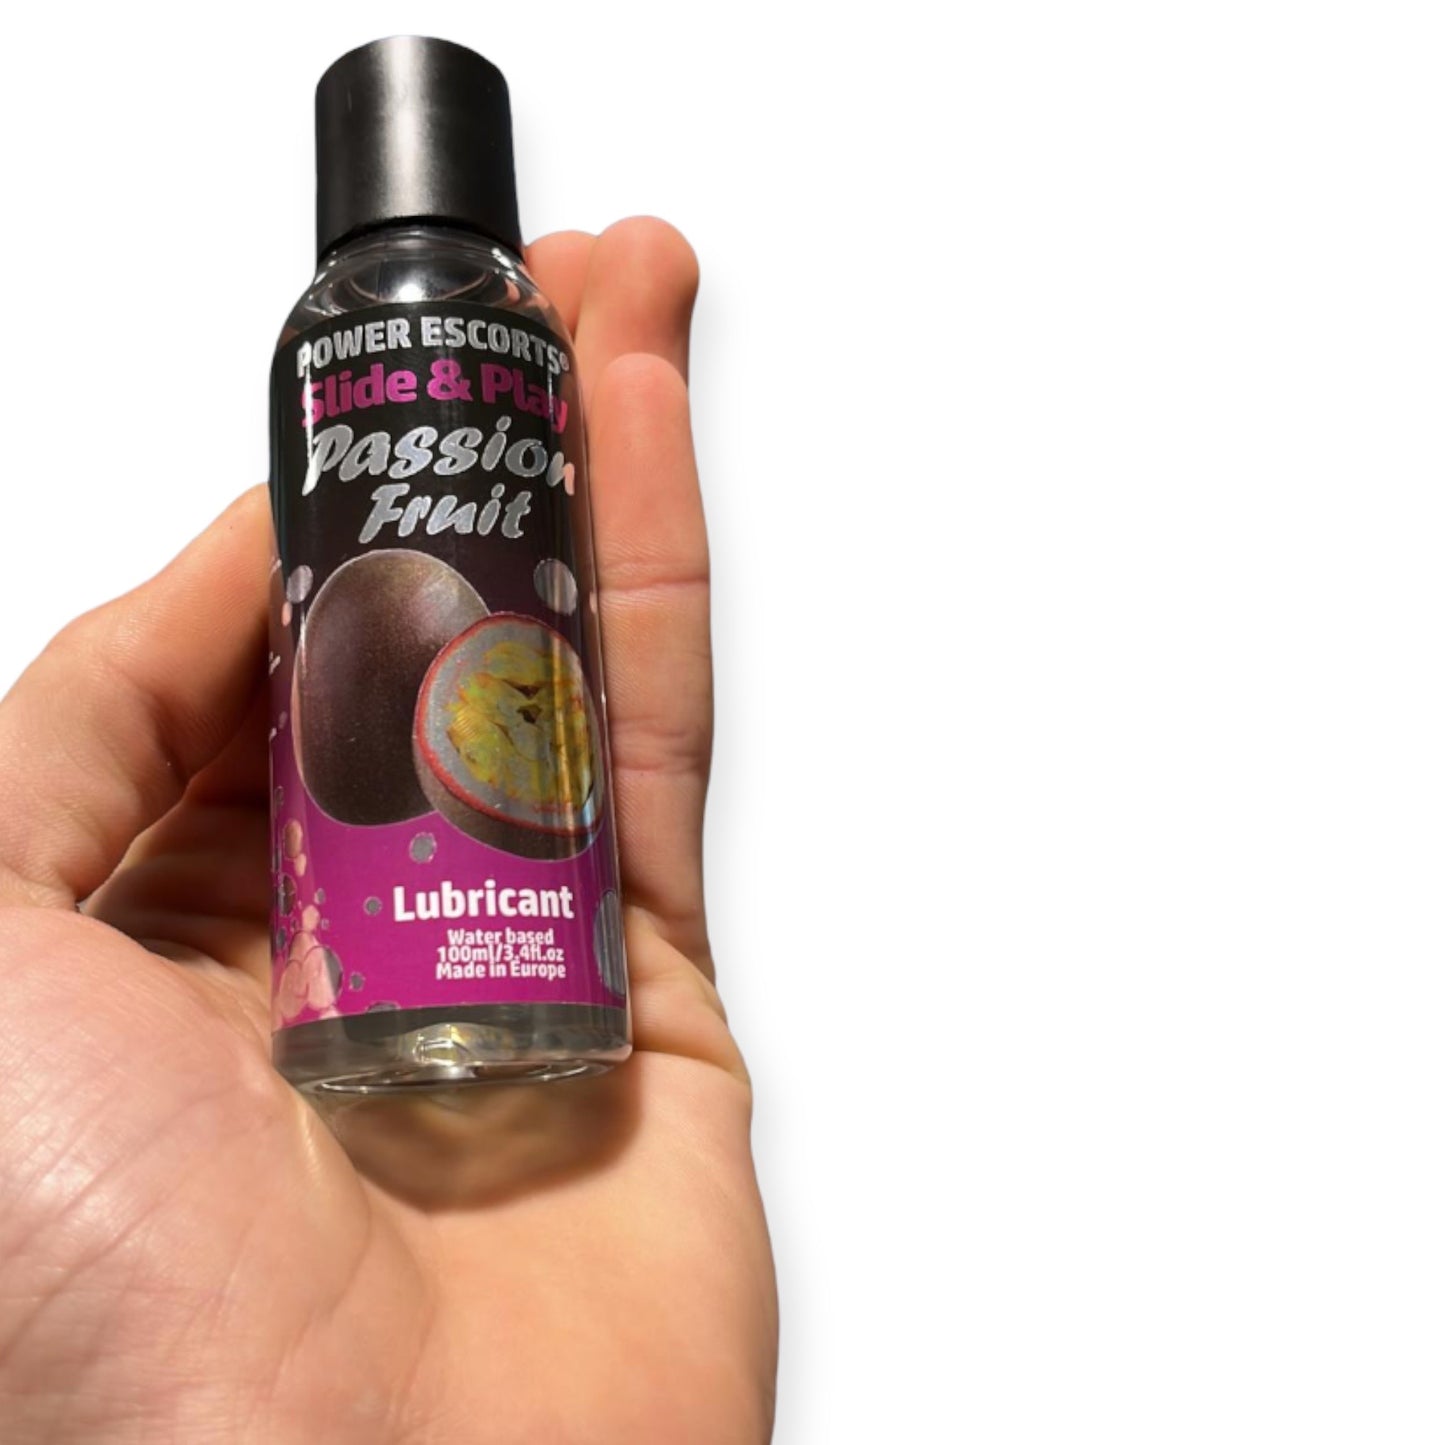 Power Escorts - DR05 - Passion Fruit Lubricant 100 ML - Slide & Play - Waterbased